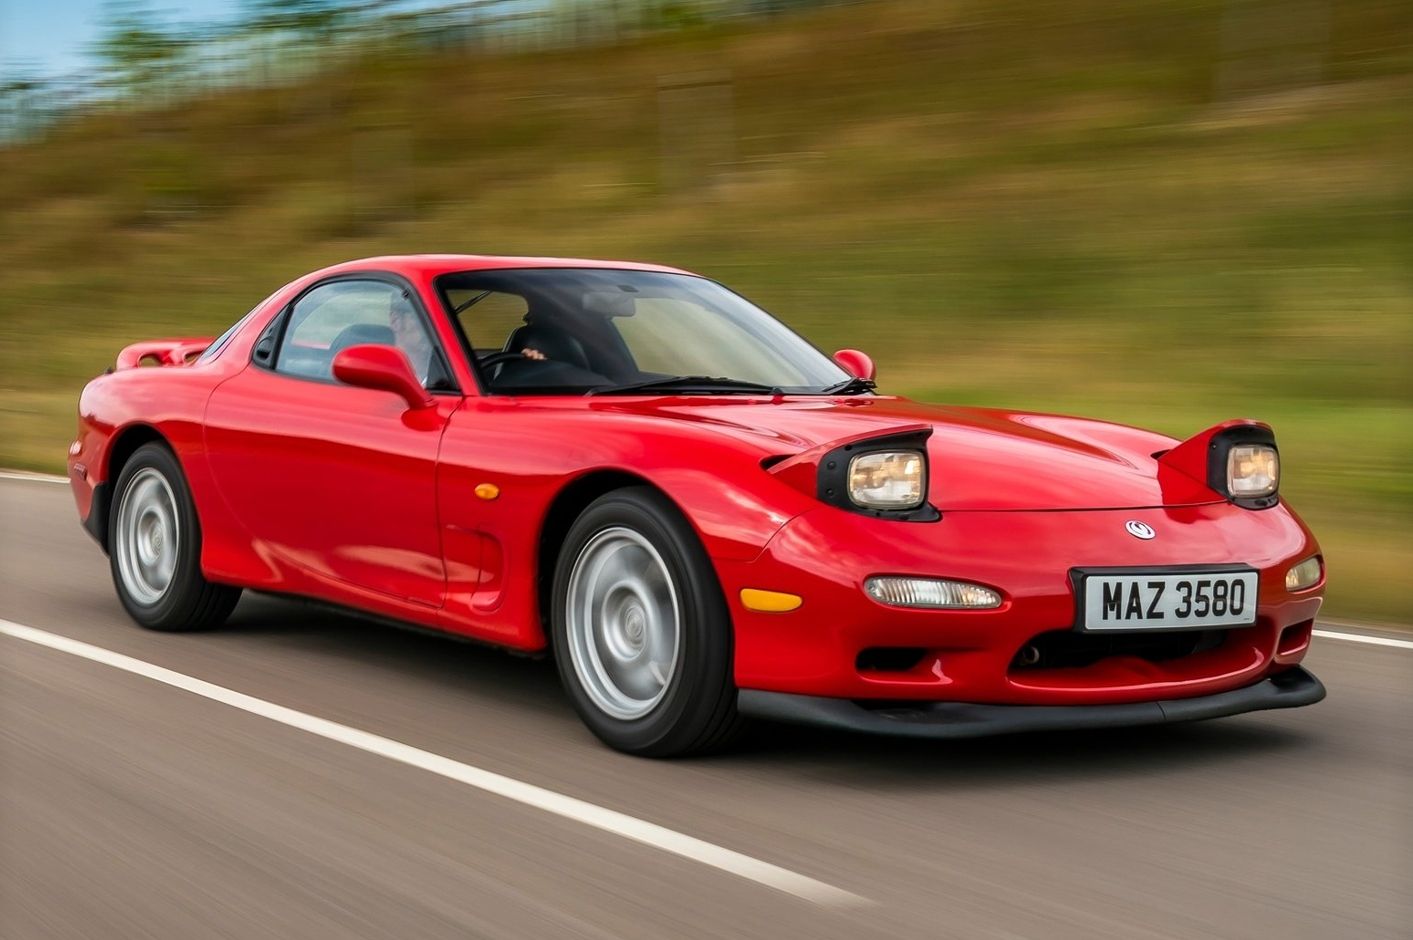 Red 1992 Mazda RX-7 driving